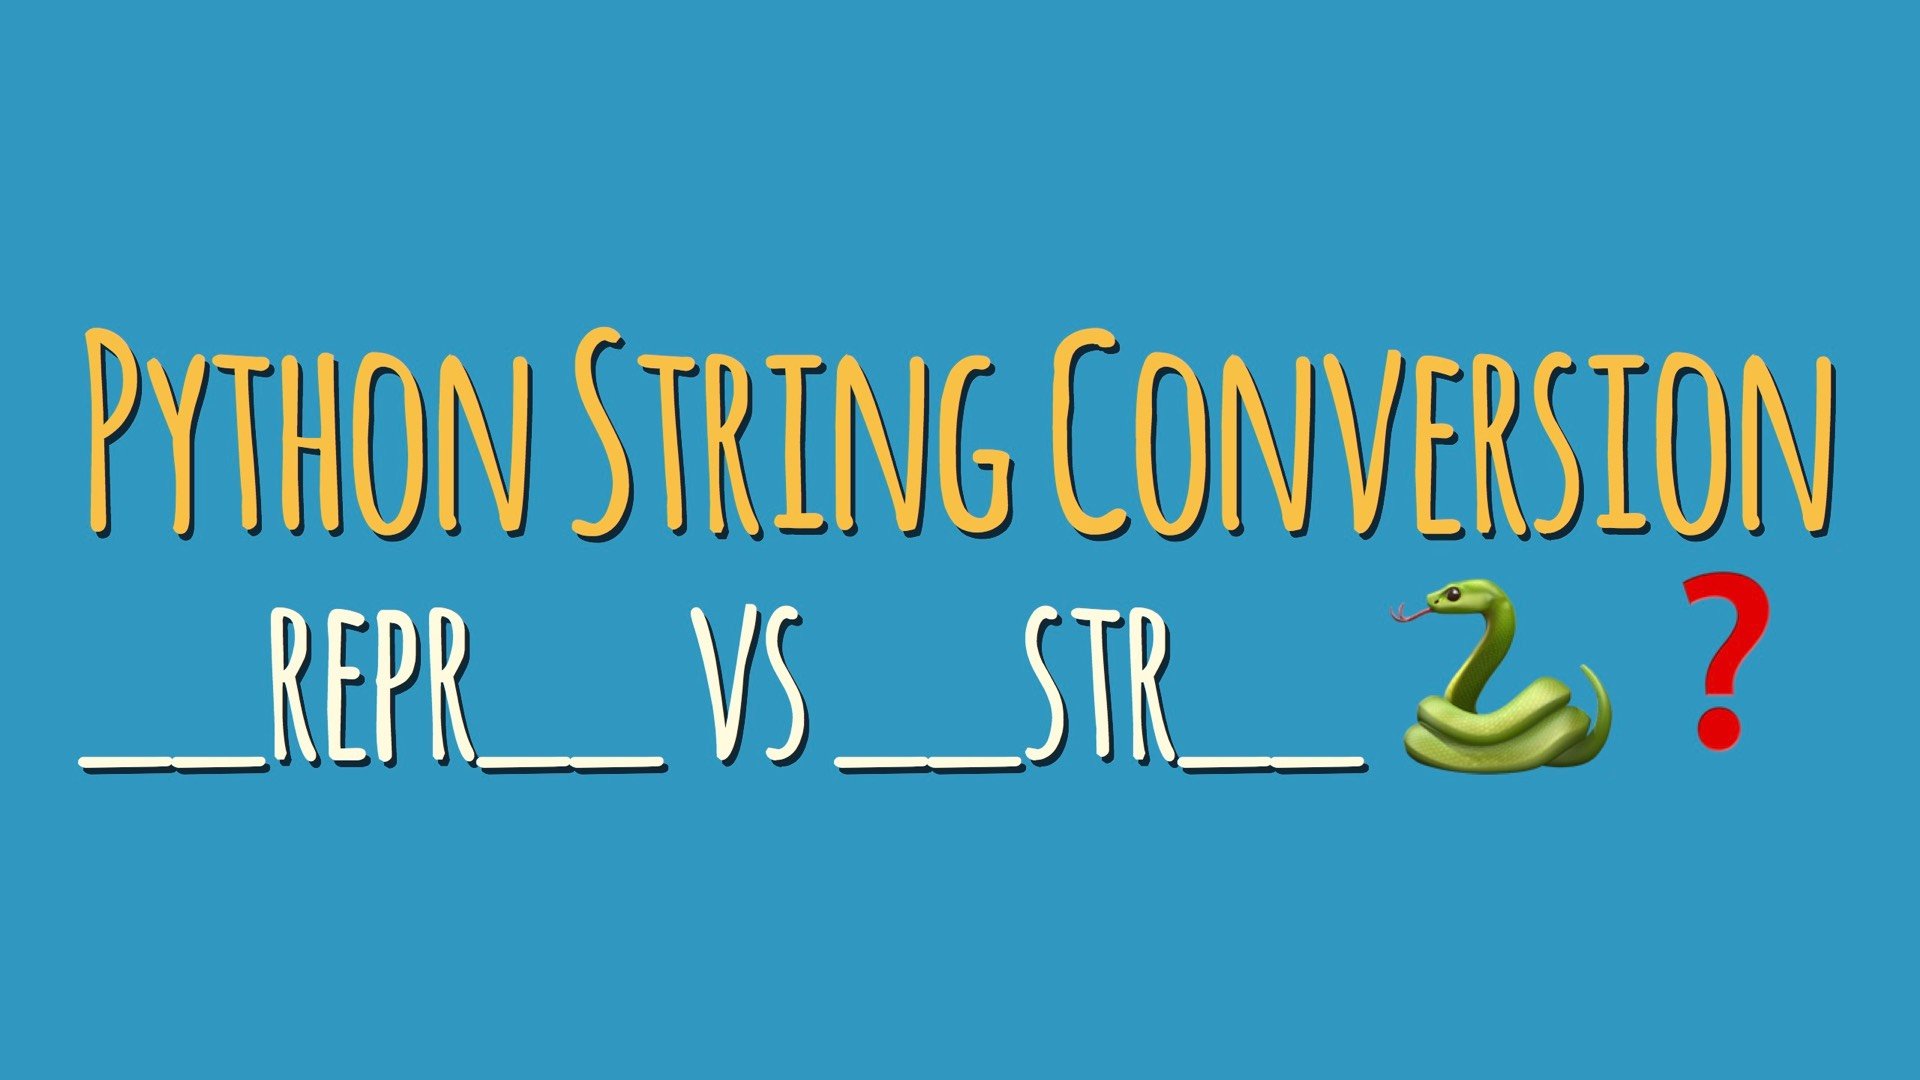 Python String Conversion 101: Why Every Class Needs a “repr”